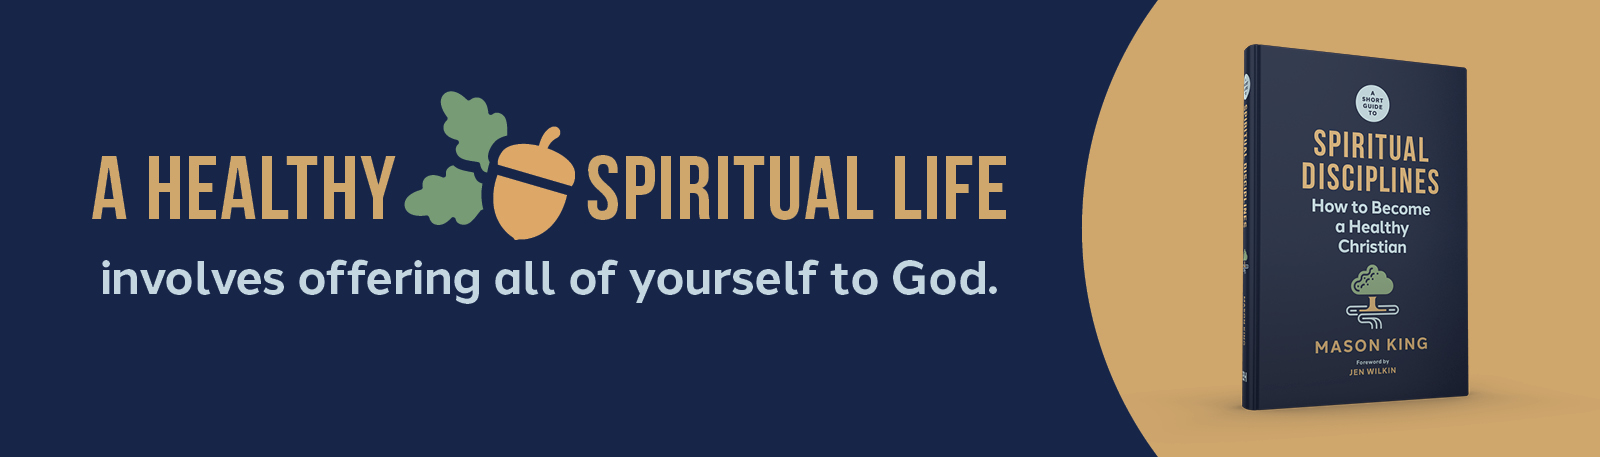 A healthy spiritual life involves offering all of yourself to God.